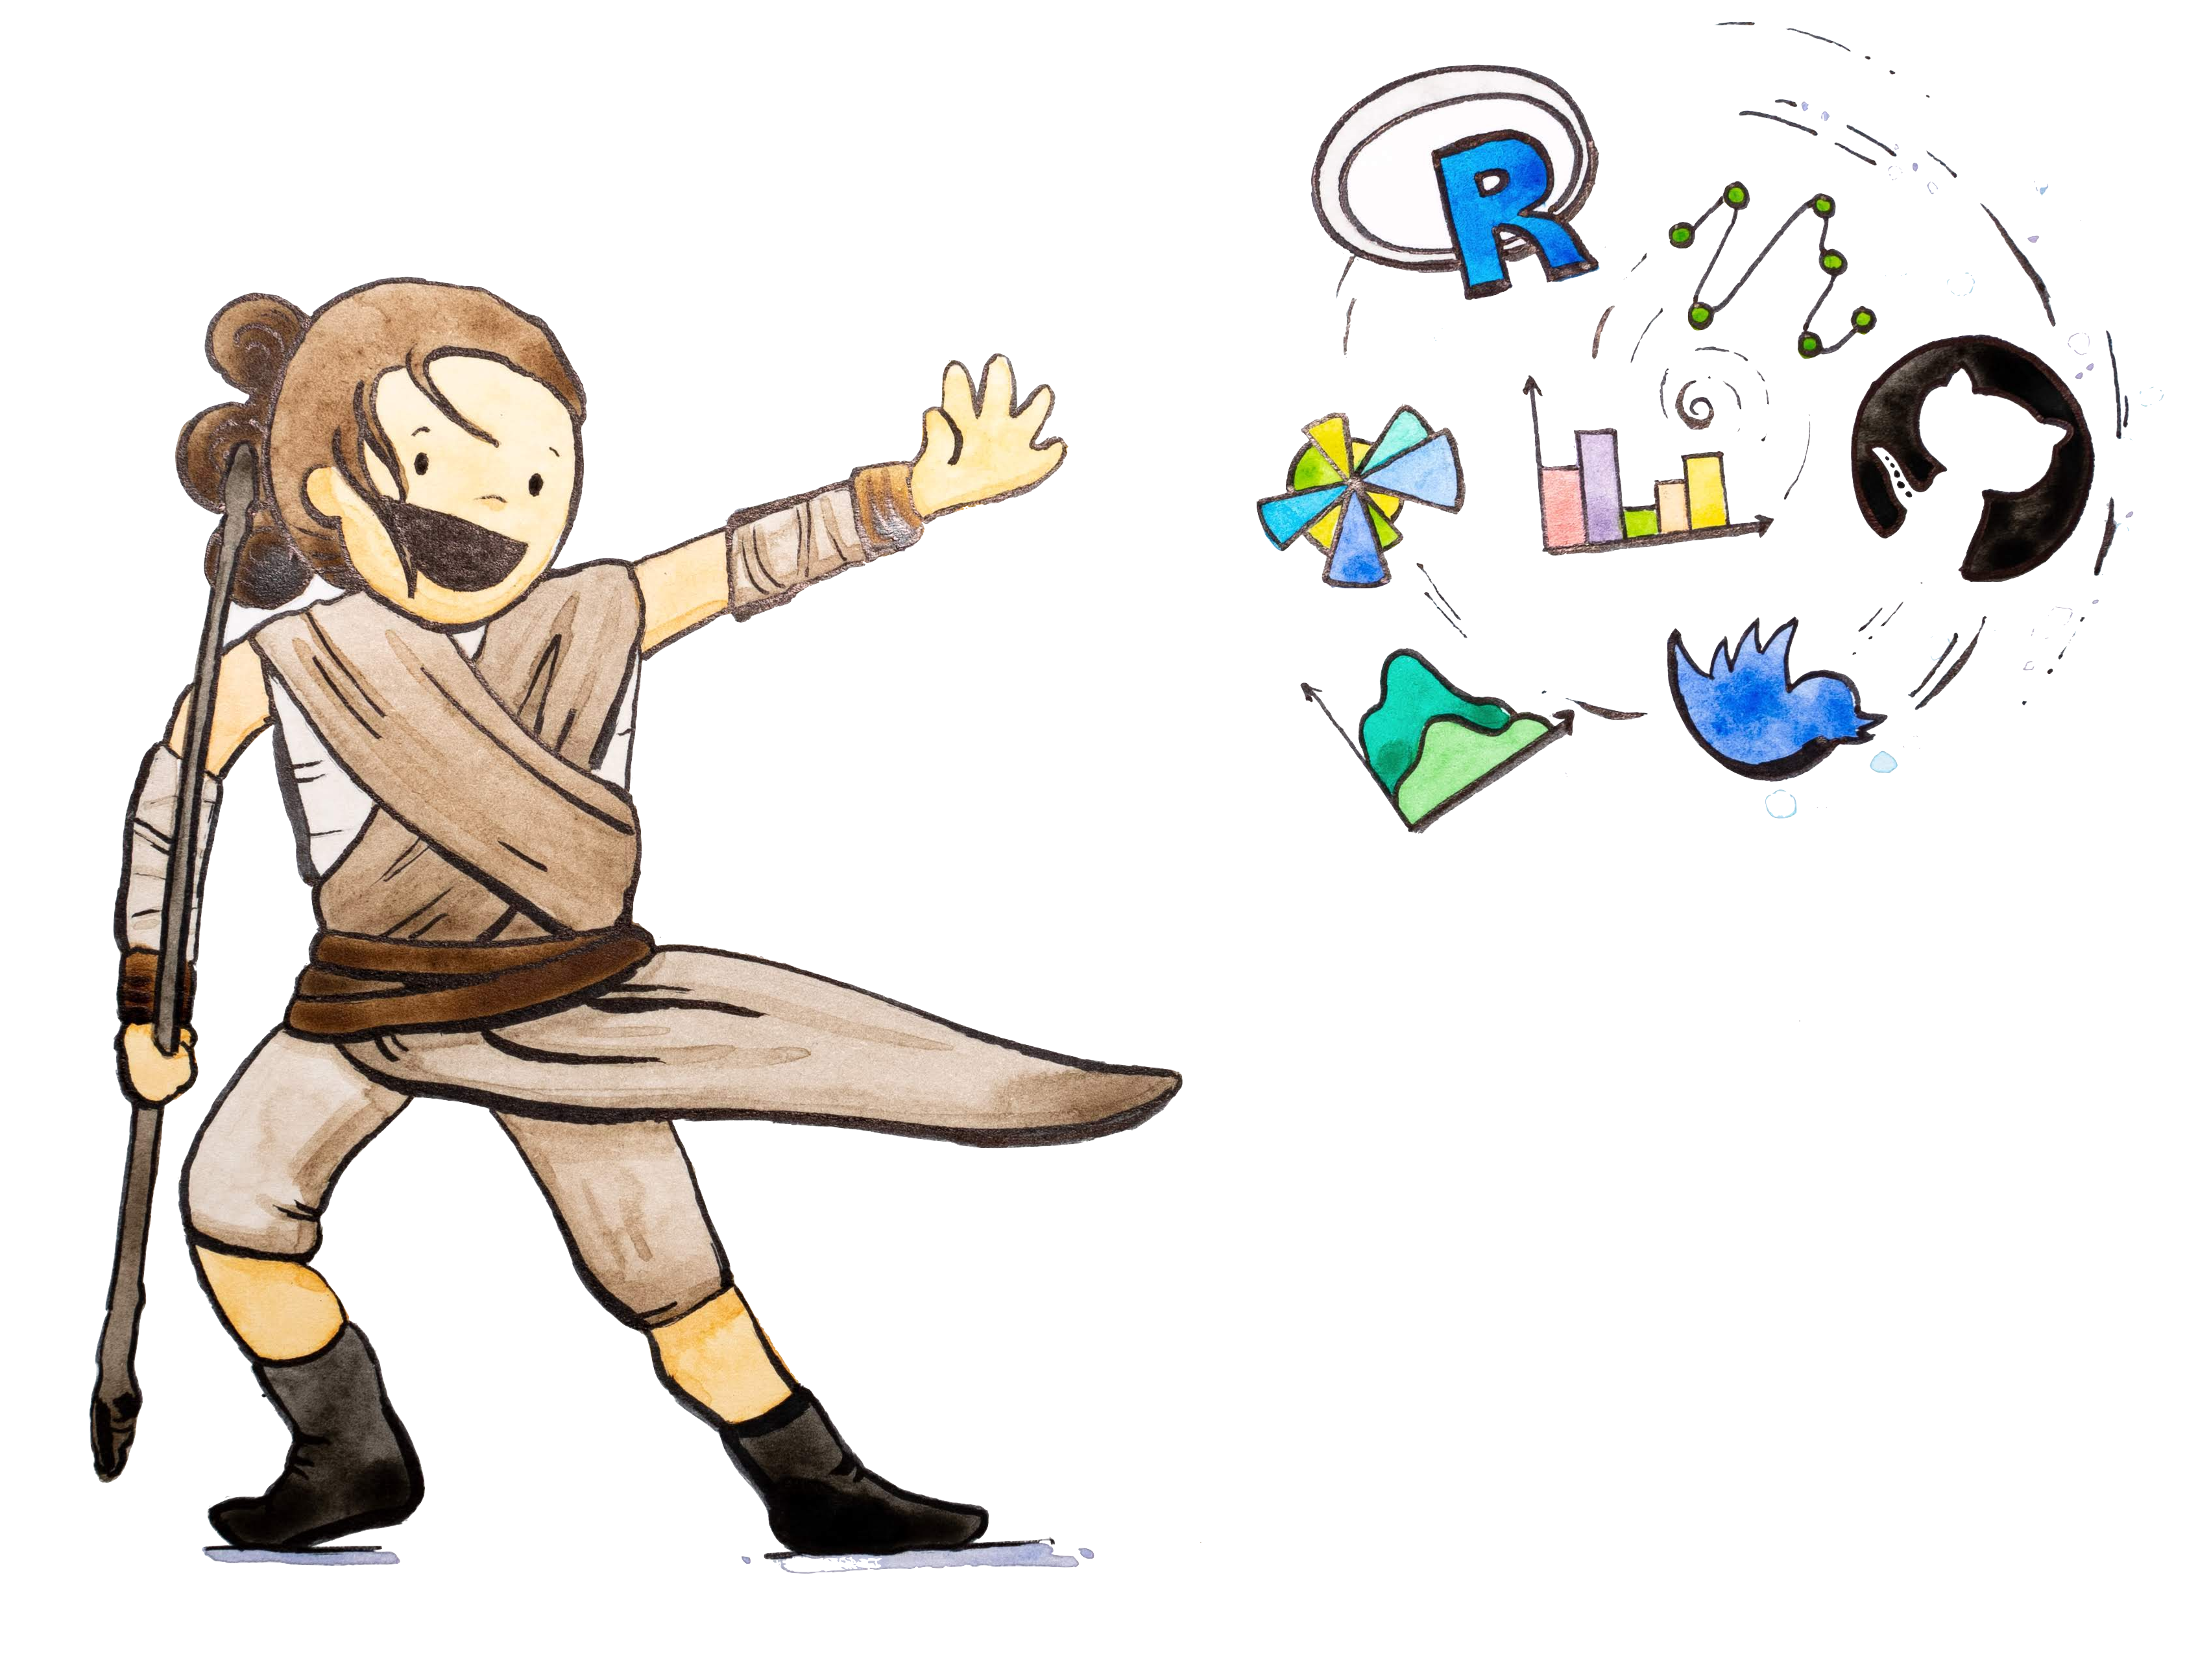 Rey uses the force to levitate open data science tools, platforms, and data visualizations, including the R, GitHut, and Twitter logos, a bar plot, line plot, area plot, and petal plot.